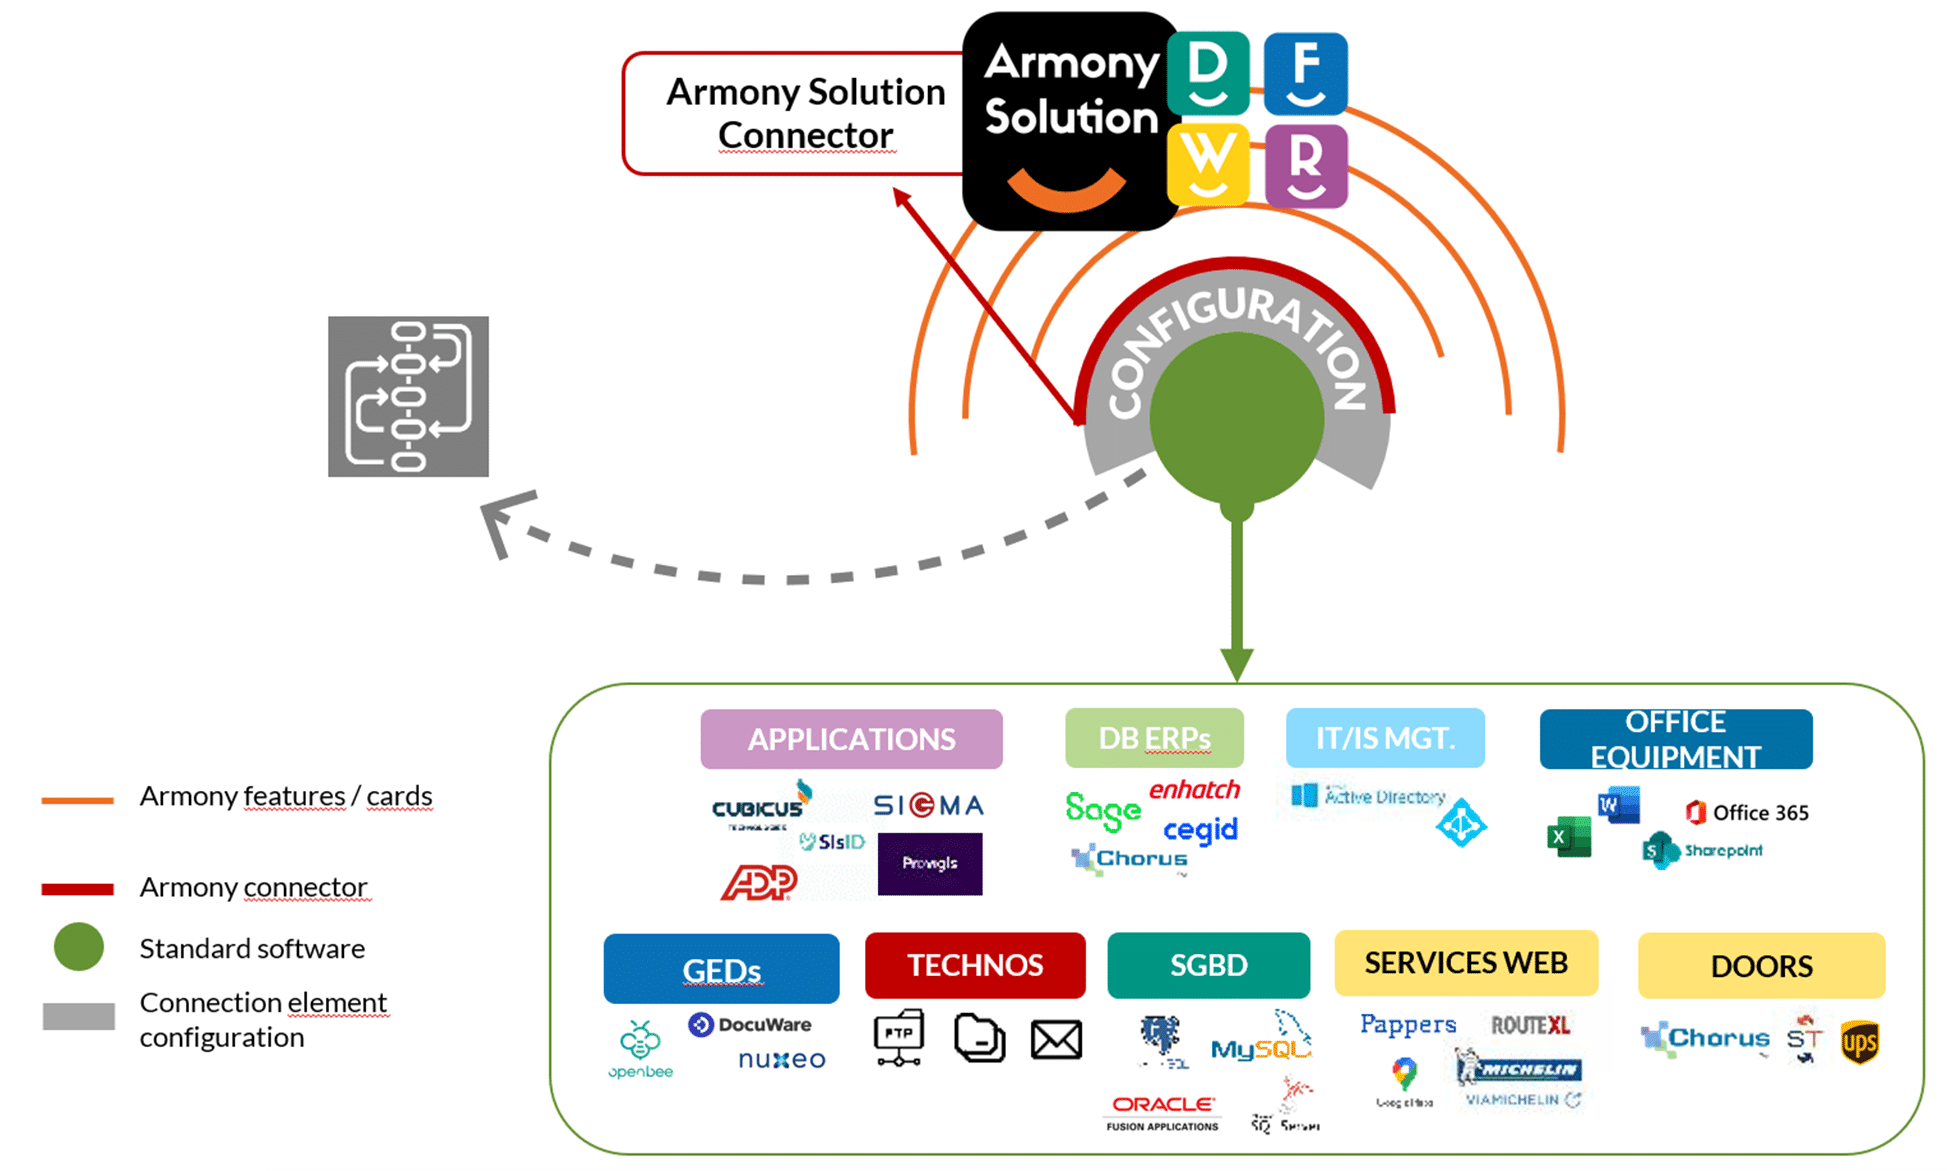 A schematic explanation of armony solution's standard connectors.